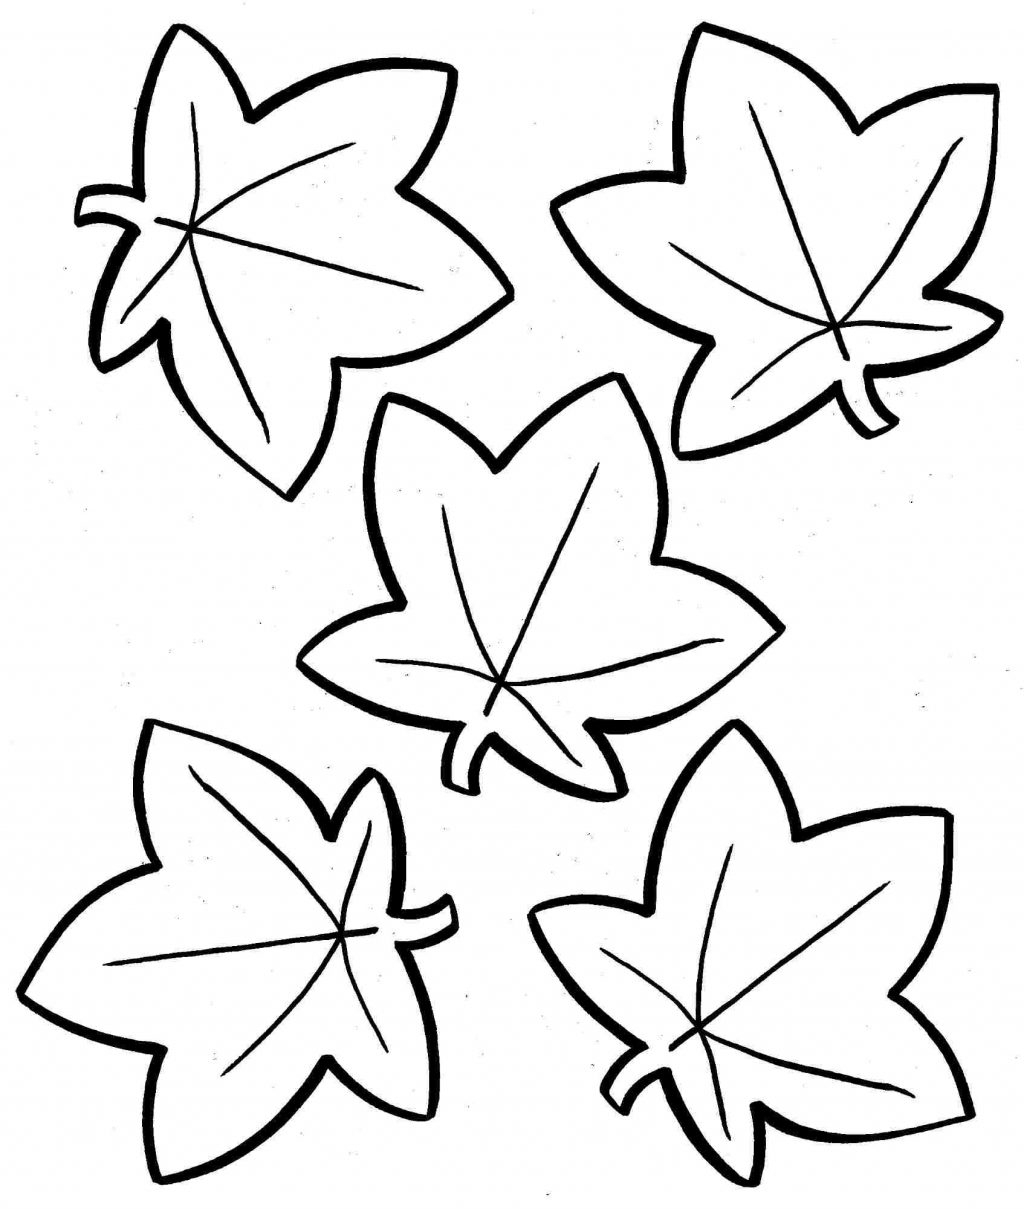 Coloring Pages ~ Coloring Pages Fall Leaves Printable Autumn Page Az - Free Printable Fall Leaves Coloring Pages